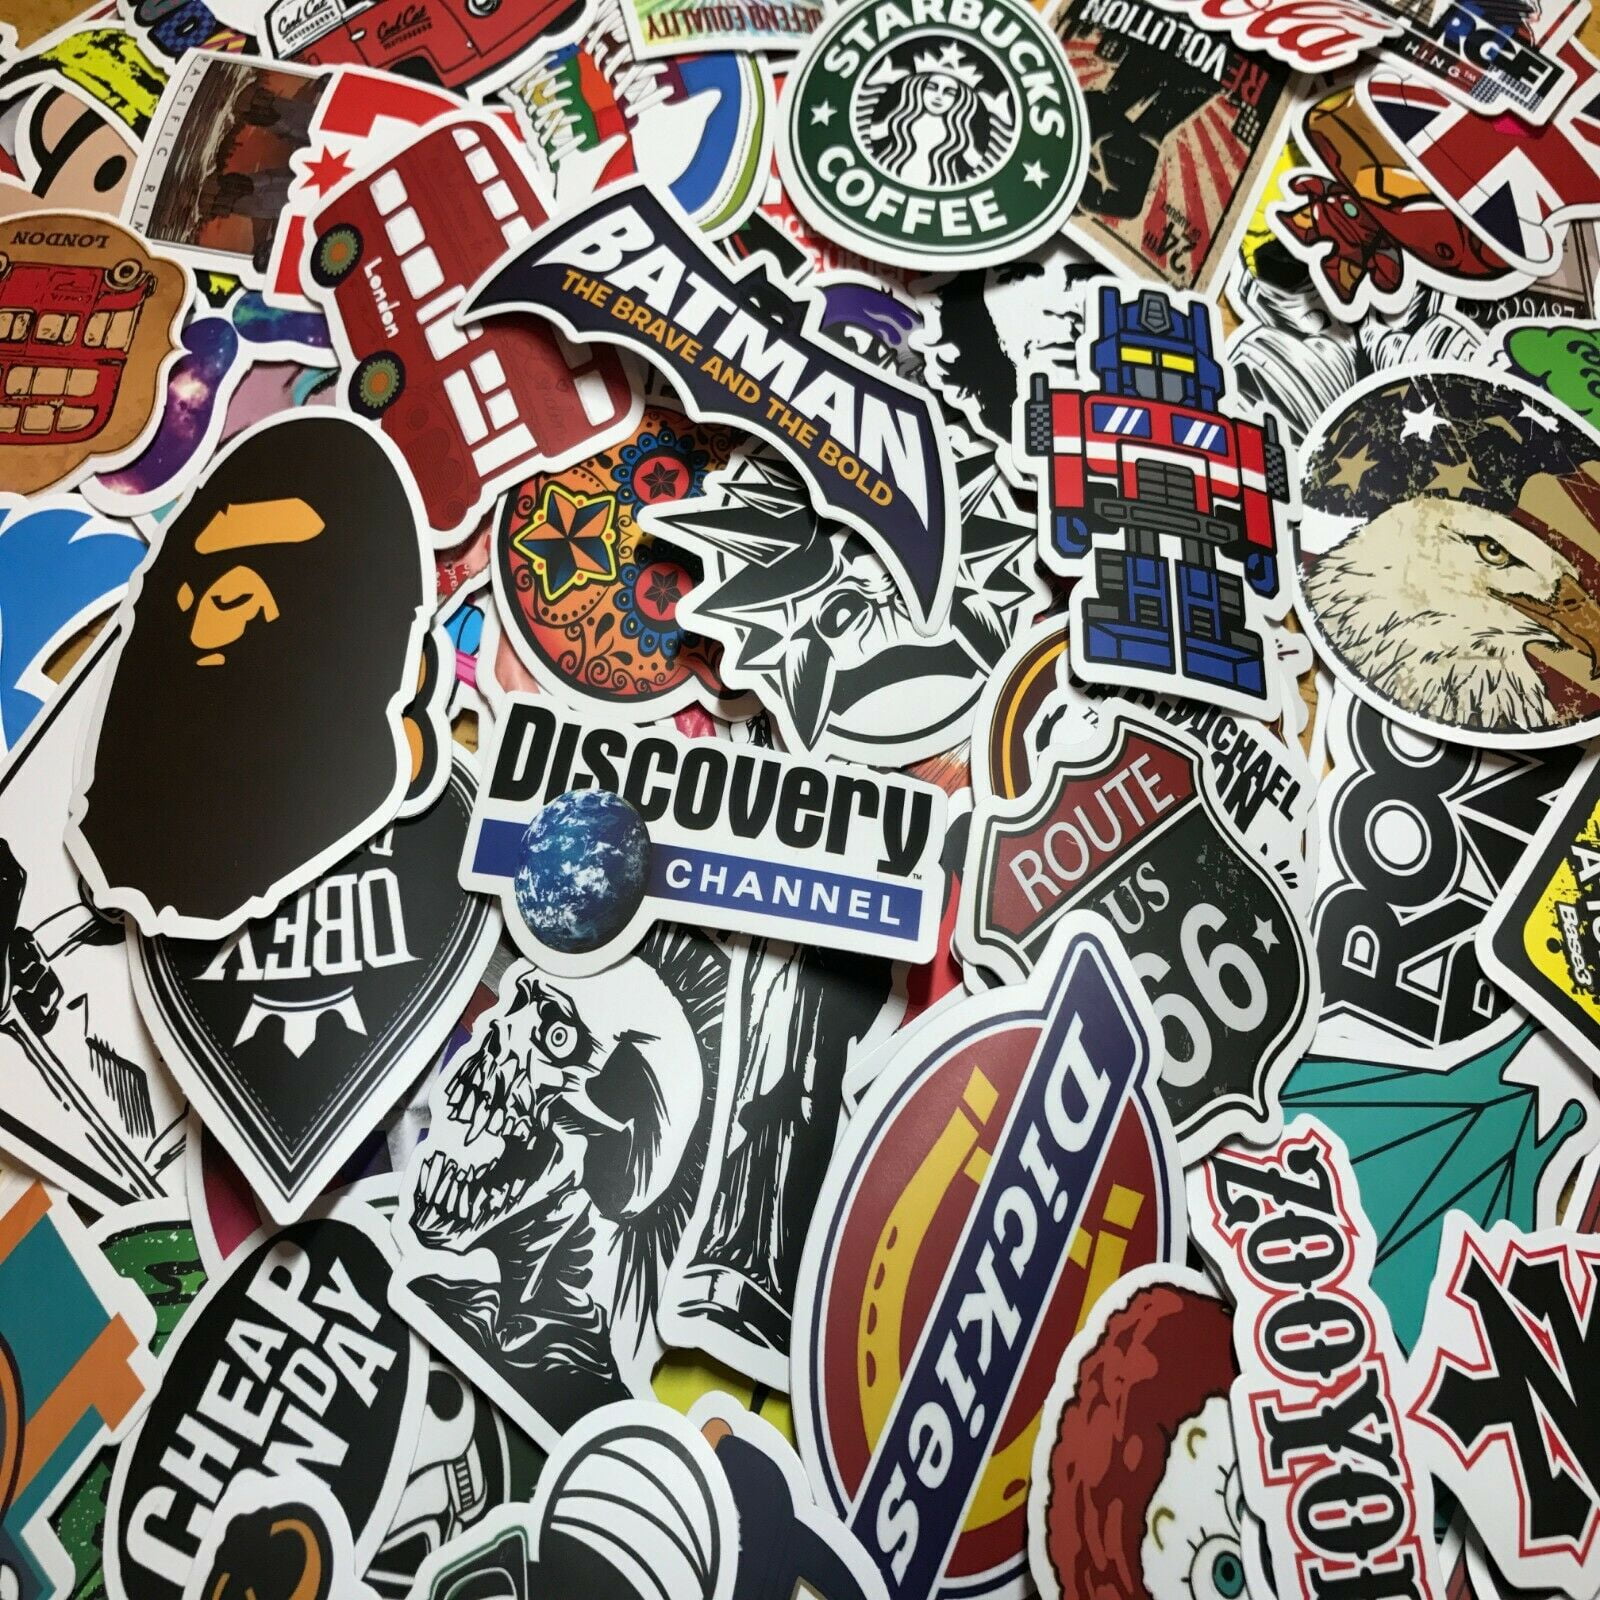 100 Funny Skateboard Stickers Vinyl Laptop Luggage Decals Dope Sticker lot cool 